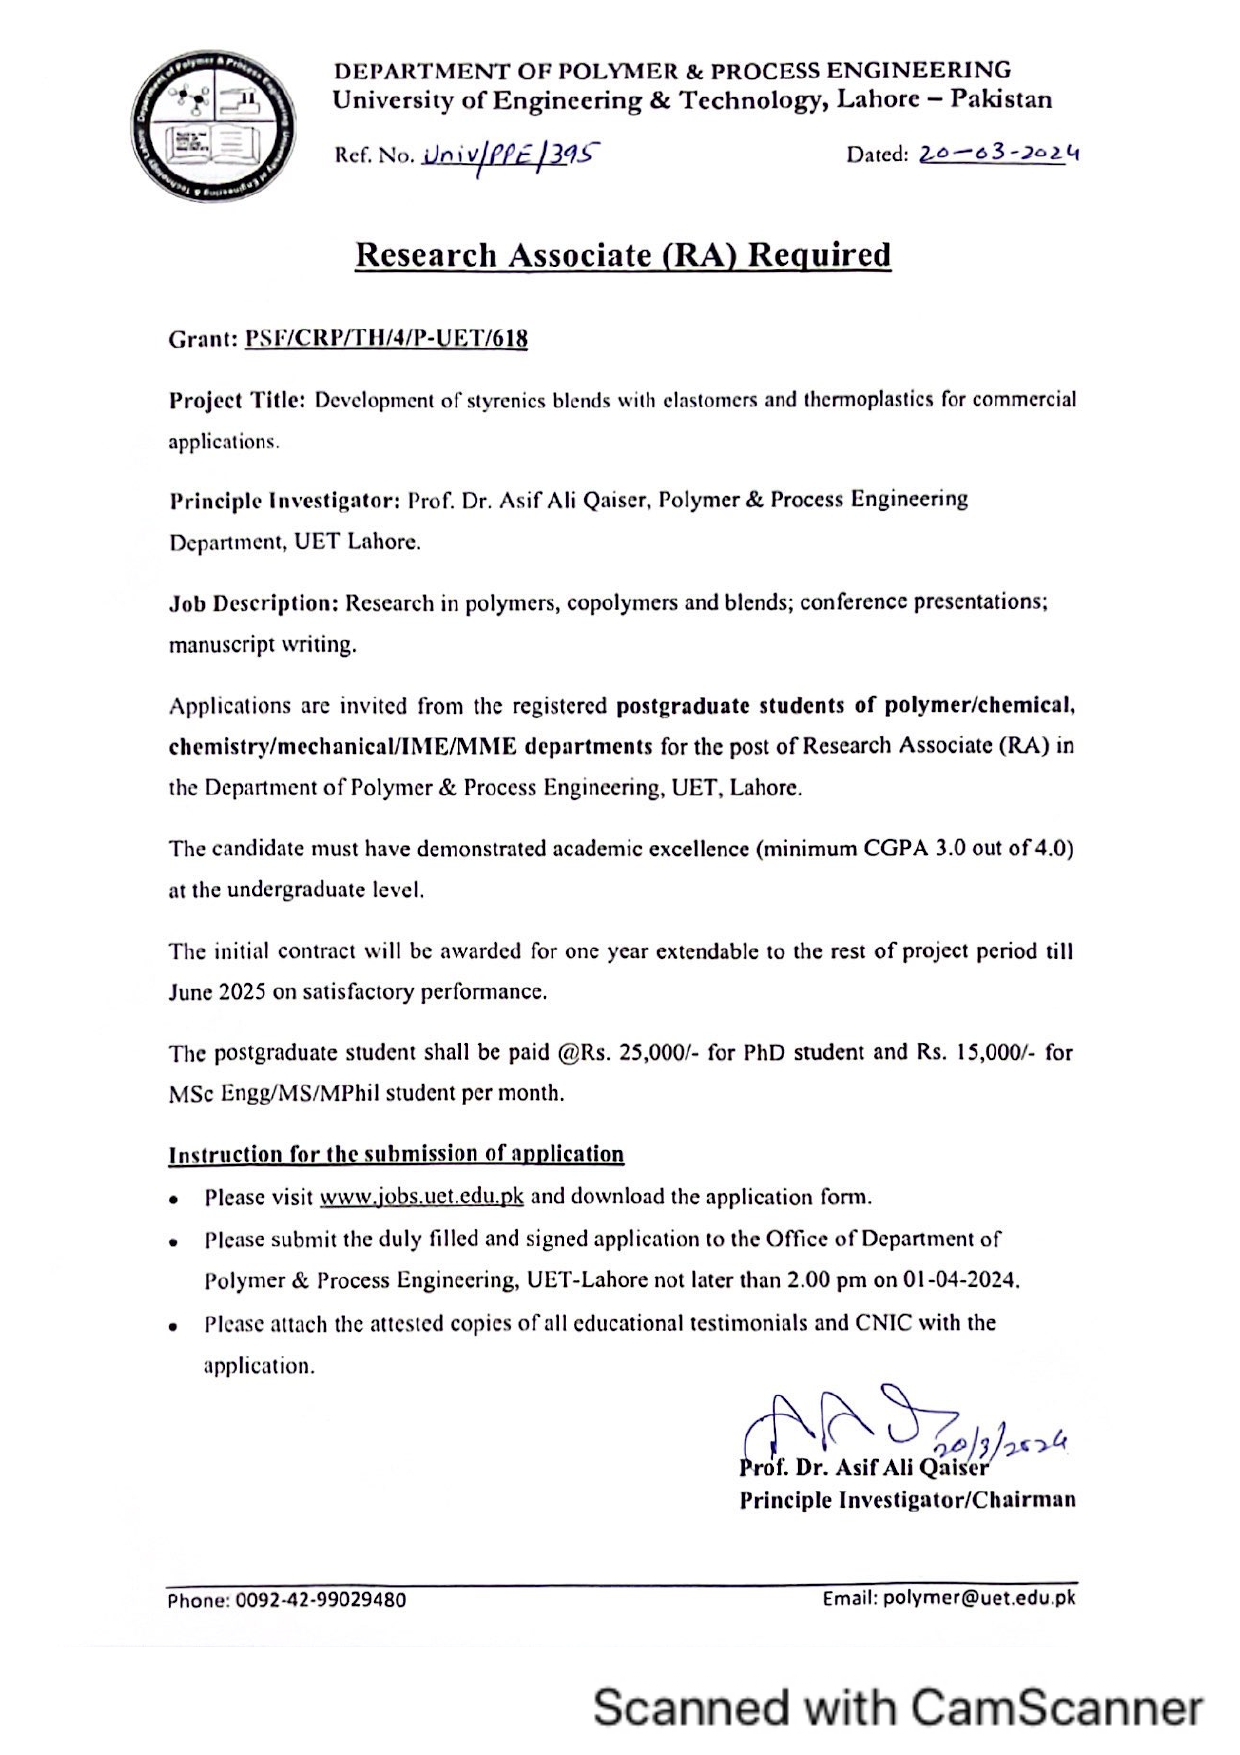 Advertisment for RA Hiring-Polymer & Process Engg Deptt_page-0001 (1)